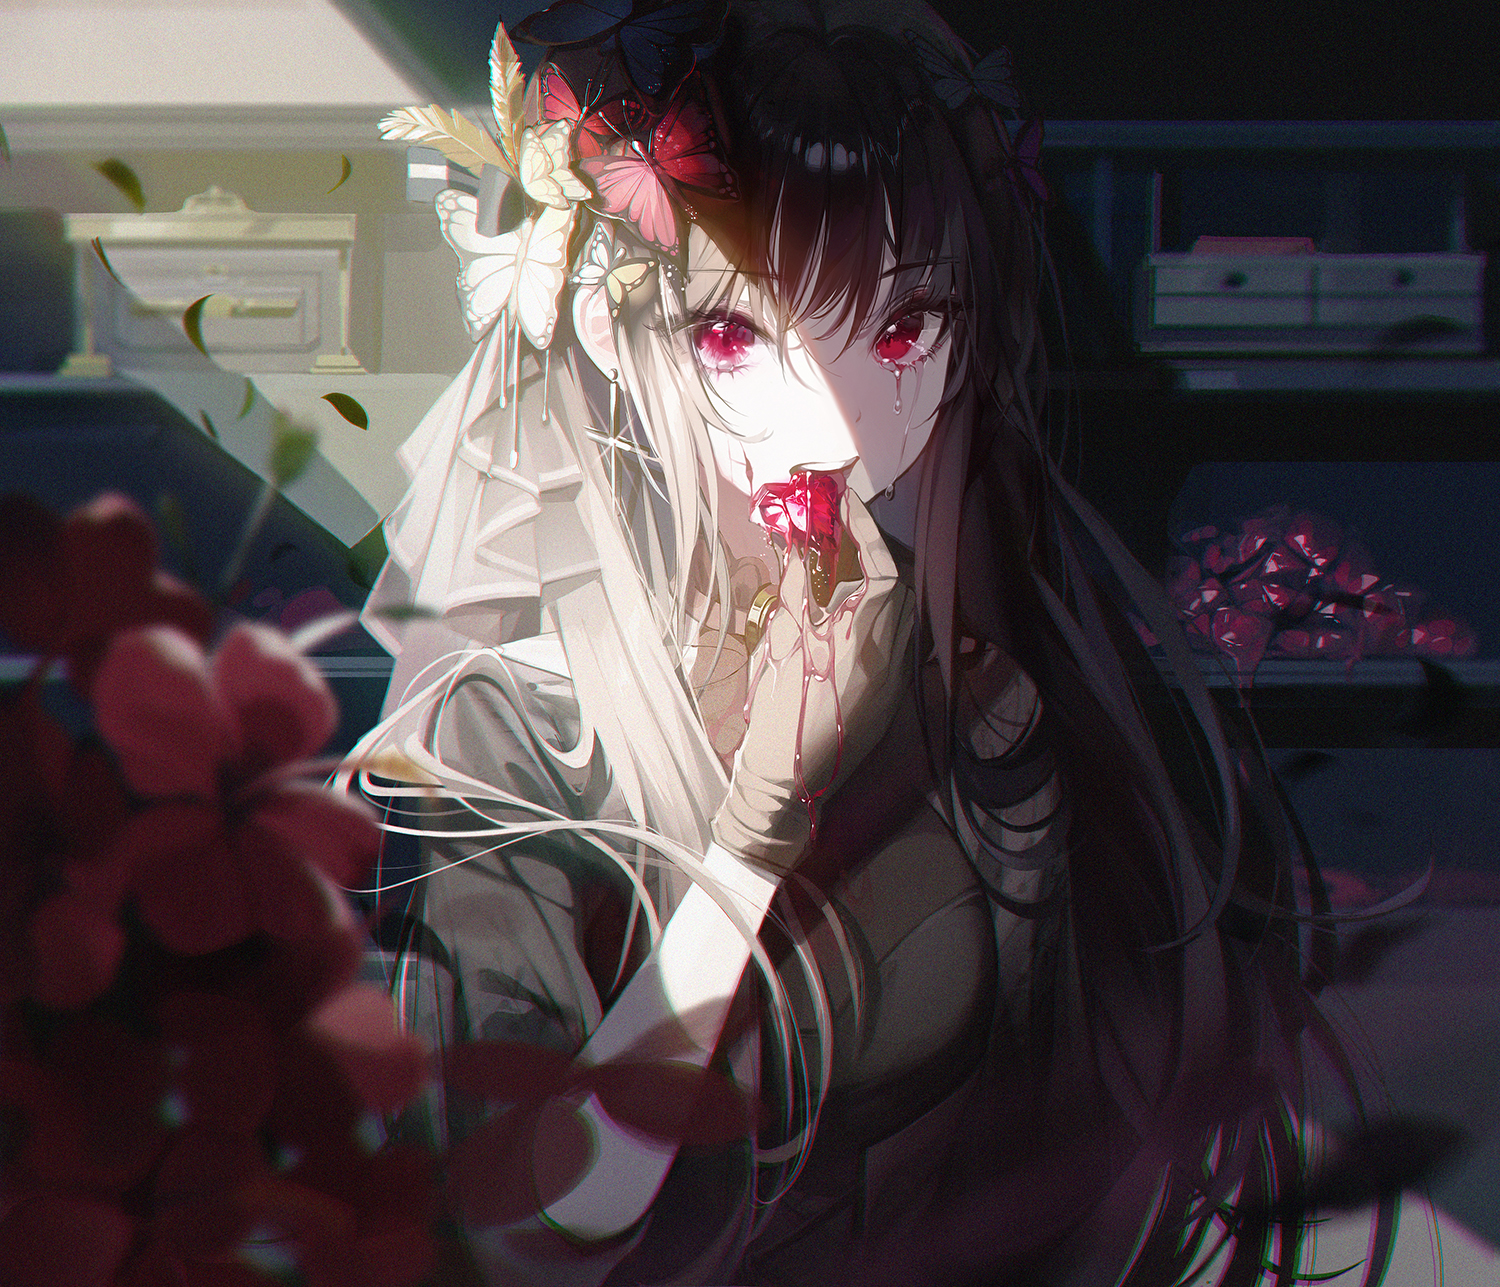 Anime 1500x1287 anime anime girls blood crying red eyes butterfly brunette long hair flowers feathers gloves depth of field petals looking at viewer necklace crystal  diamonds barrette artwork Buri women